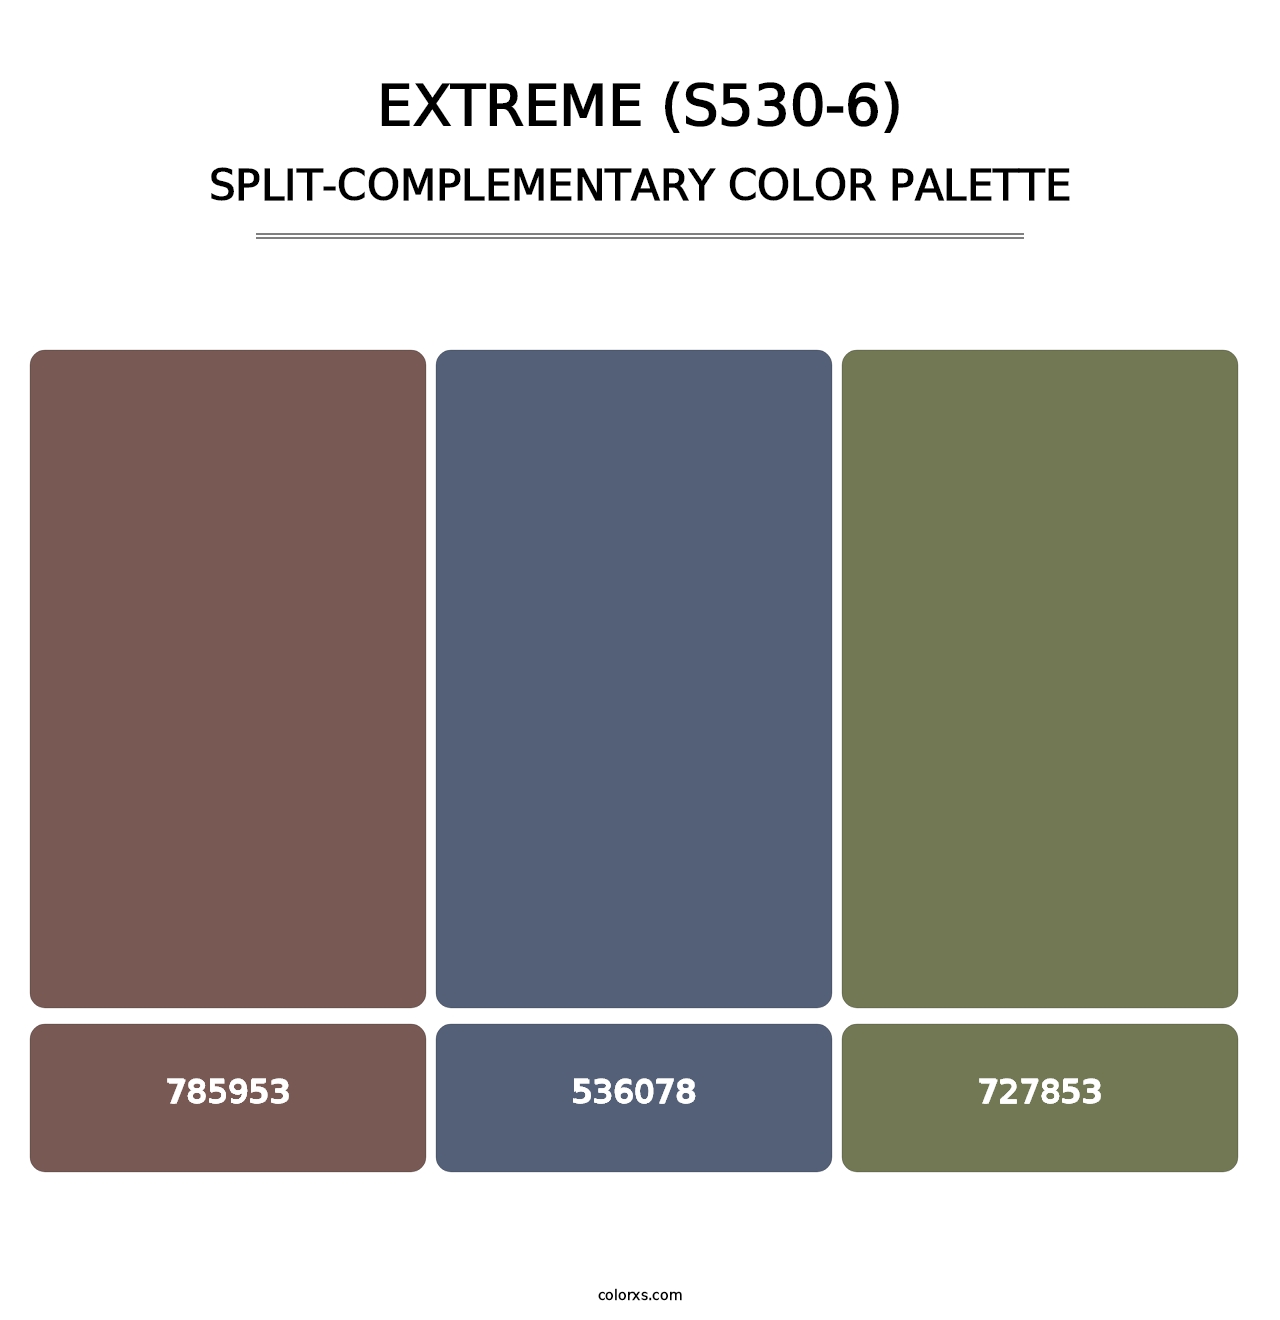 Extreme (S530-6) - Split-Complementary Color Palette